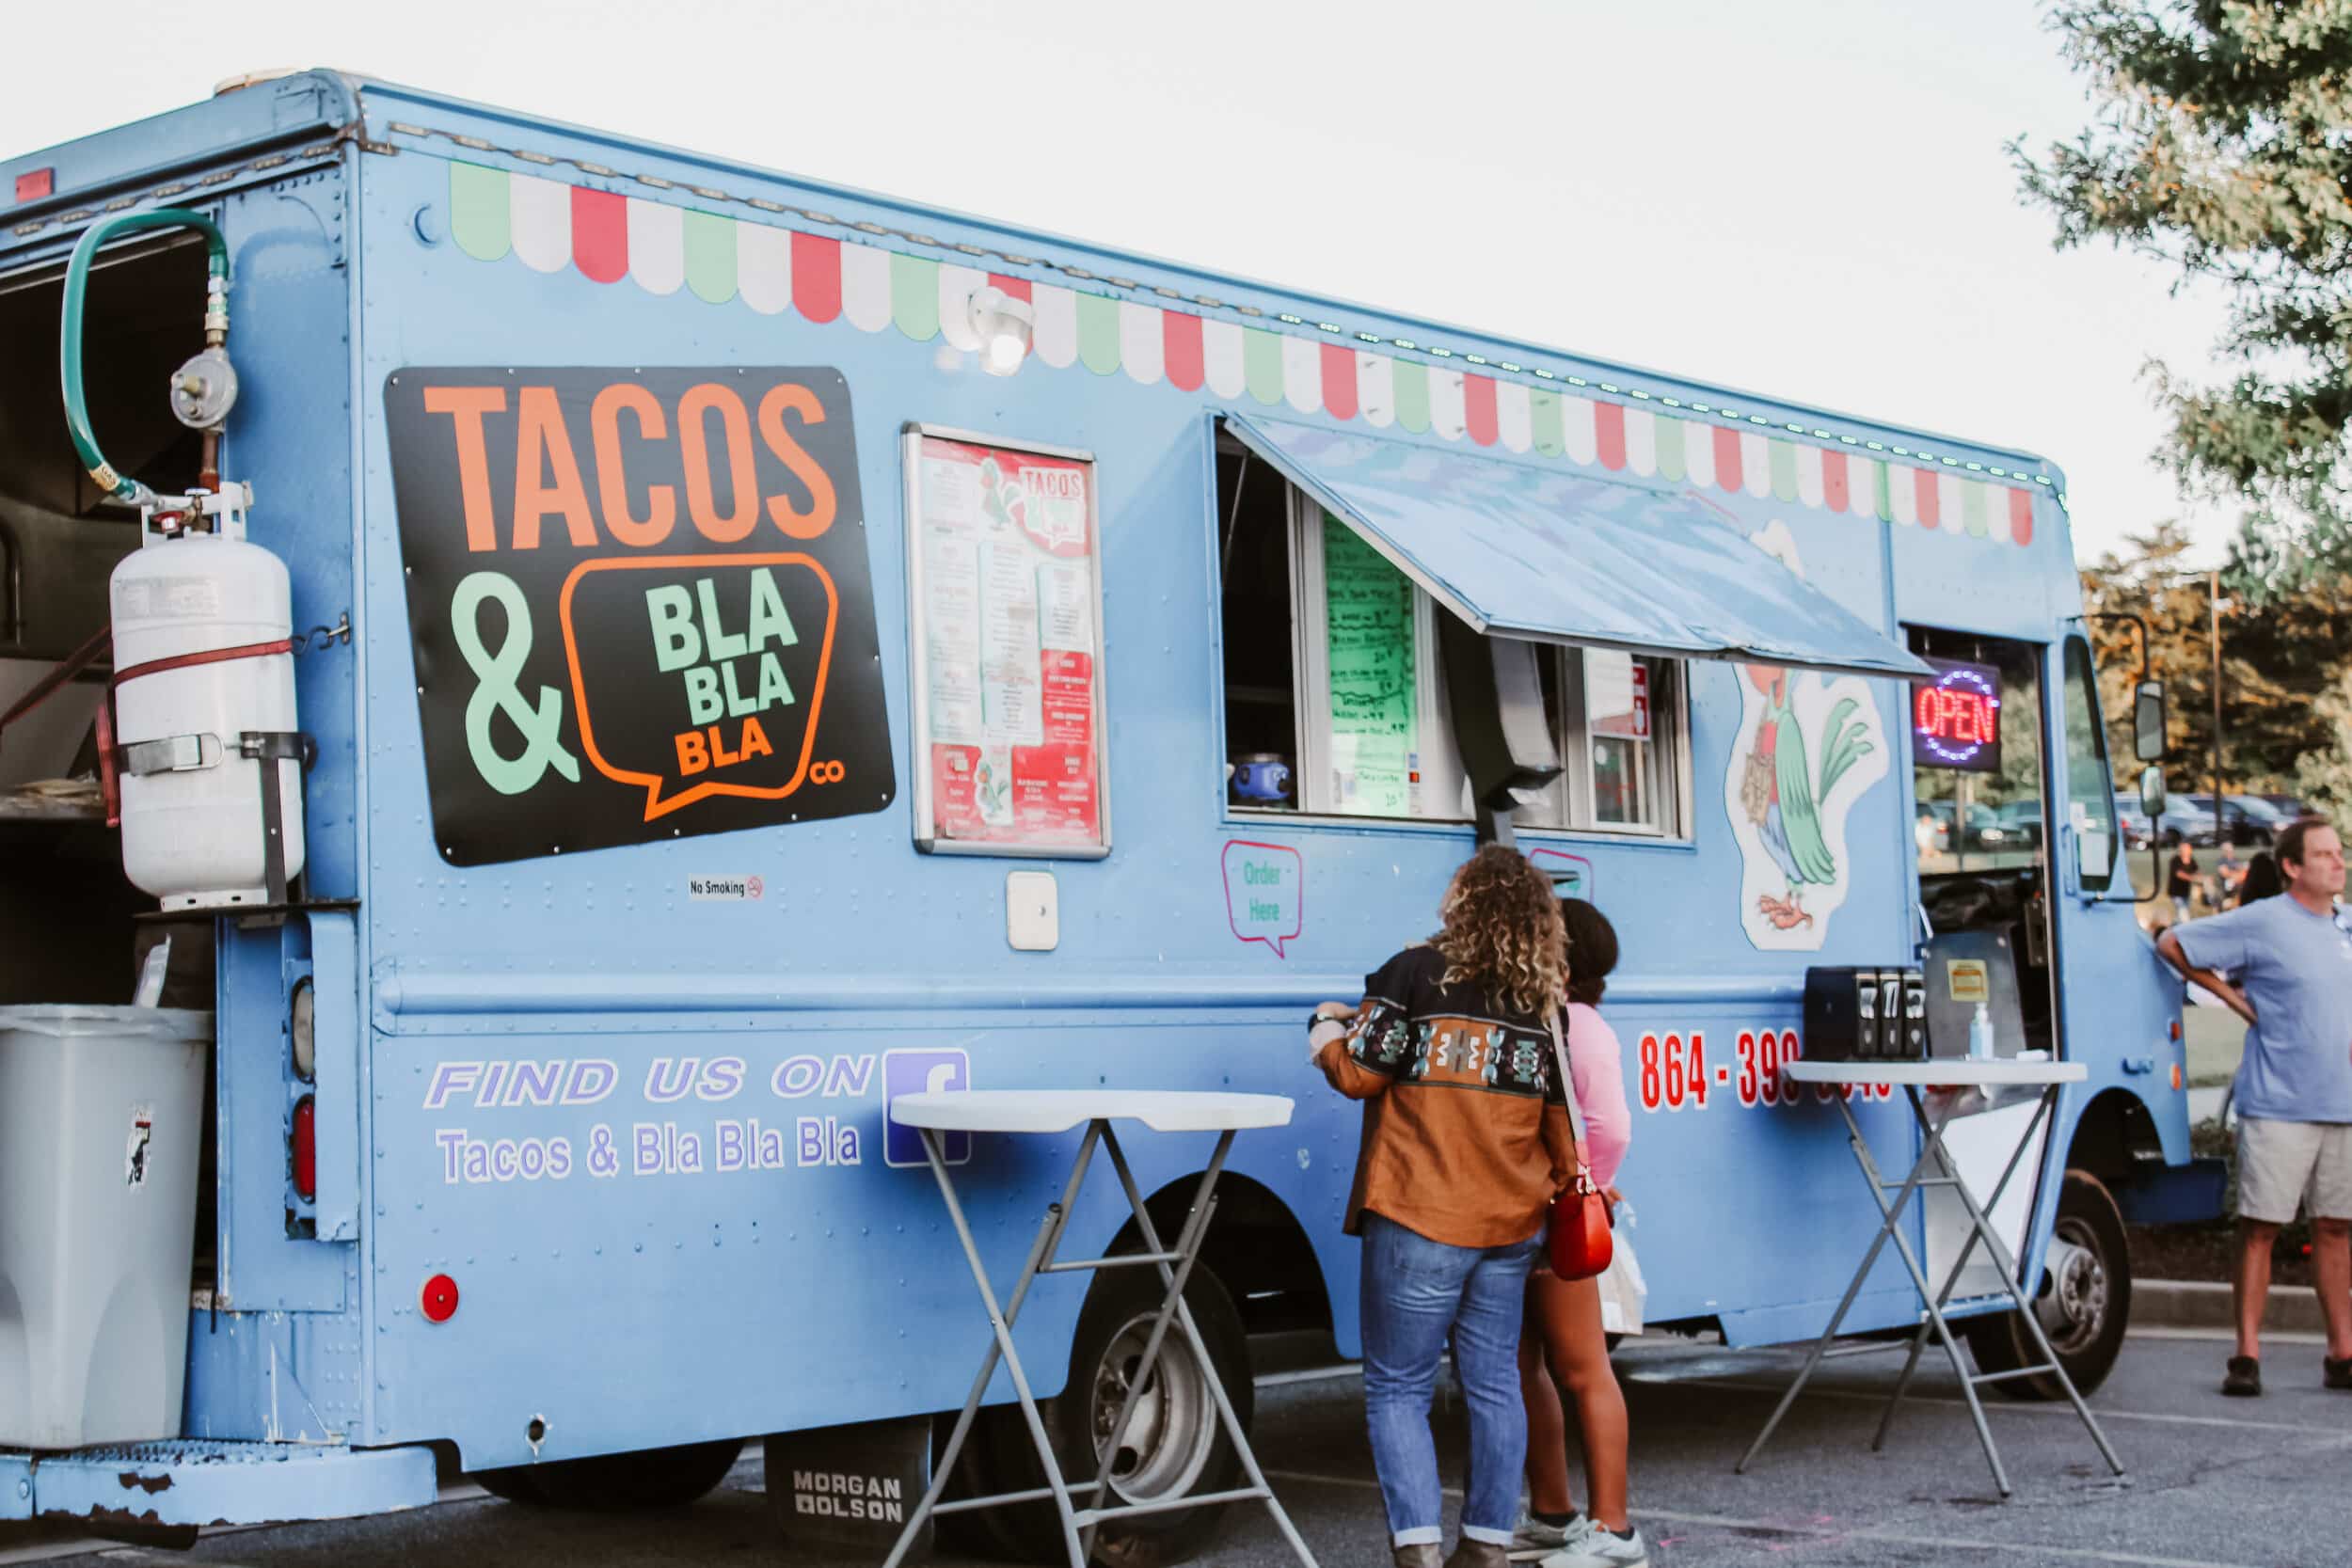 Tacos &amp; Bla Bla Bla, a family friendly Mexican restaurant based in Simpsonville, S.C., selling customers food from their food truck.